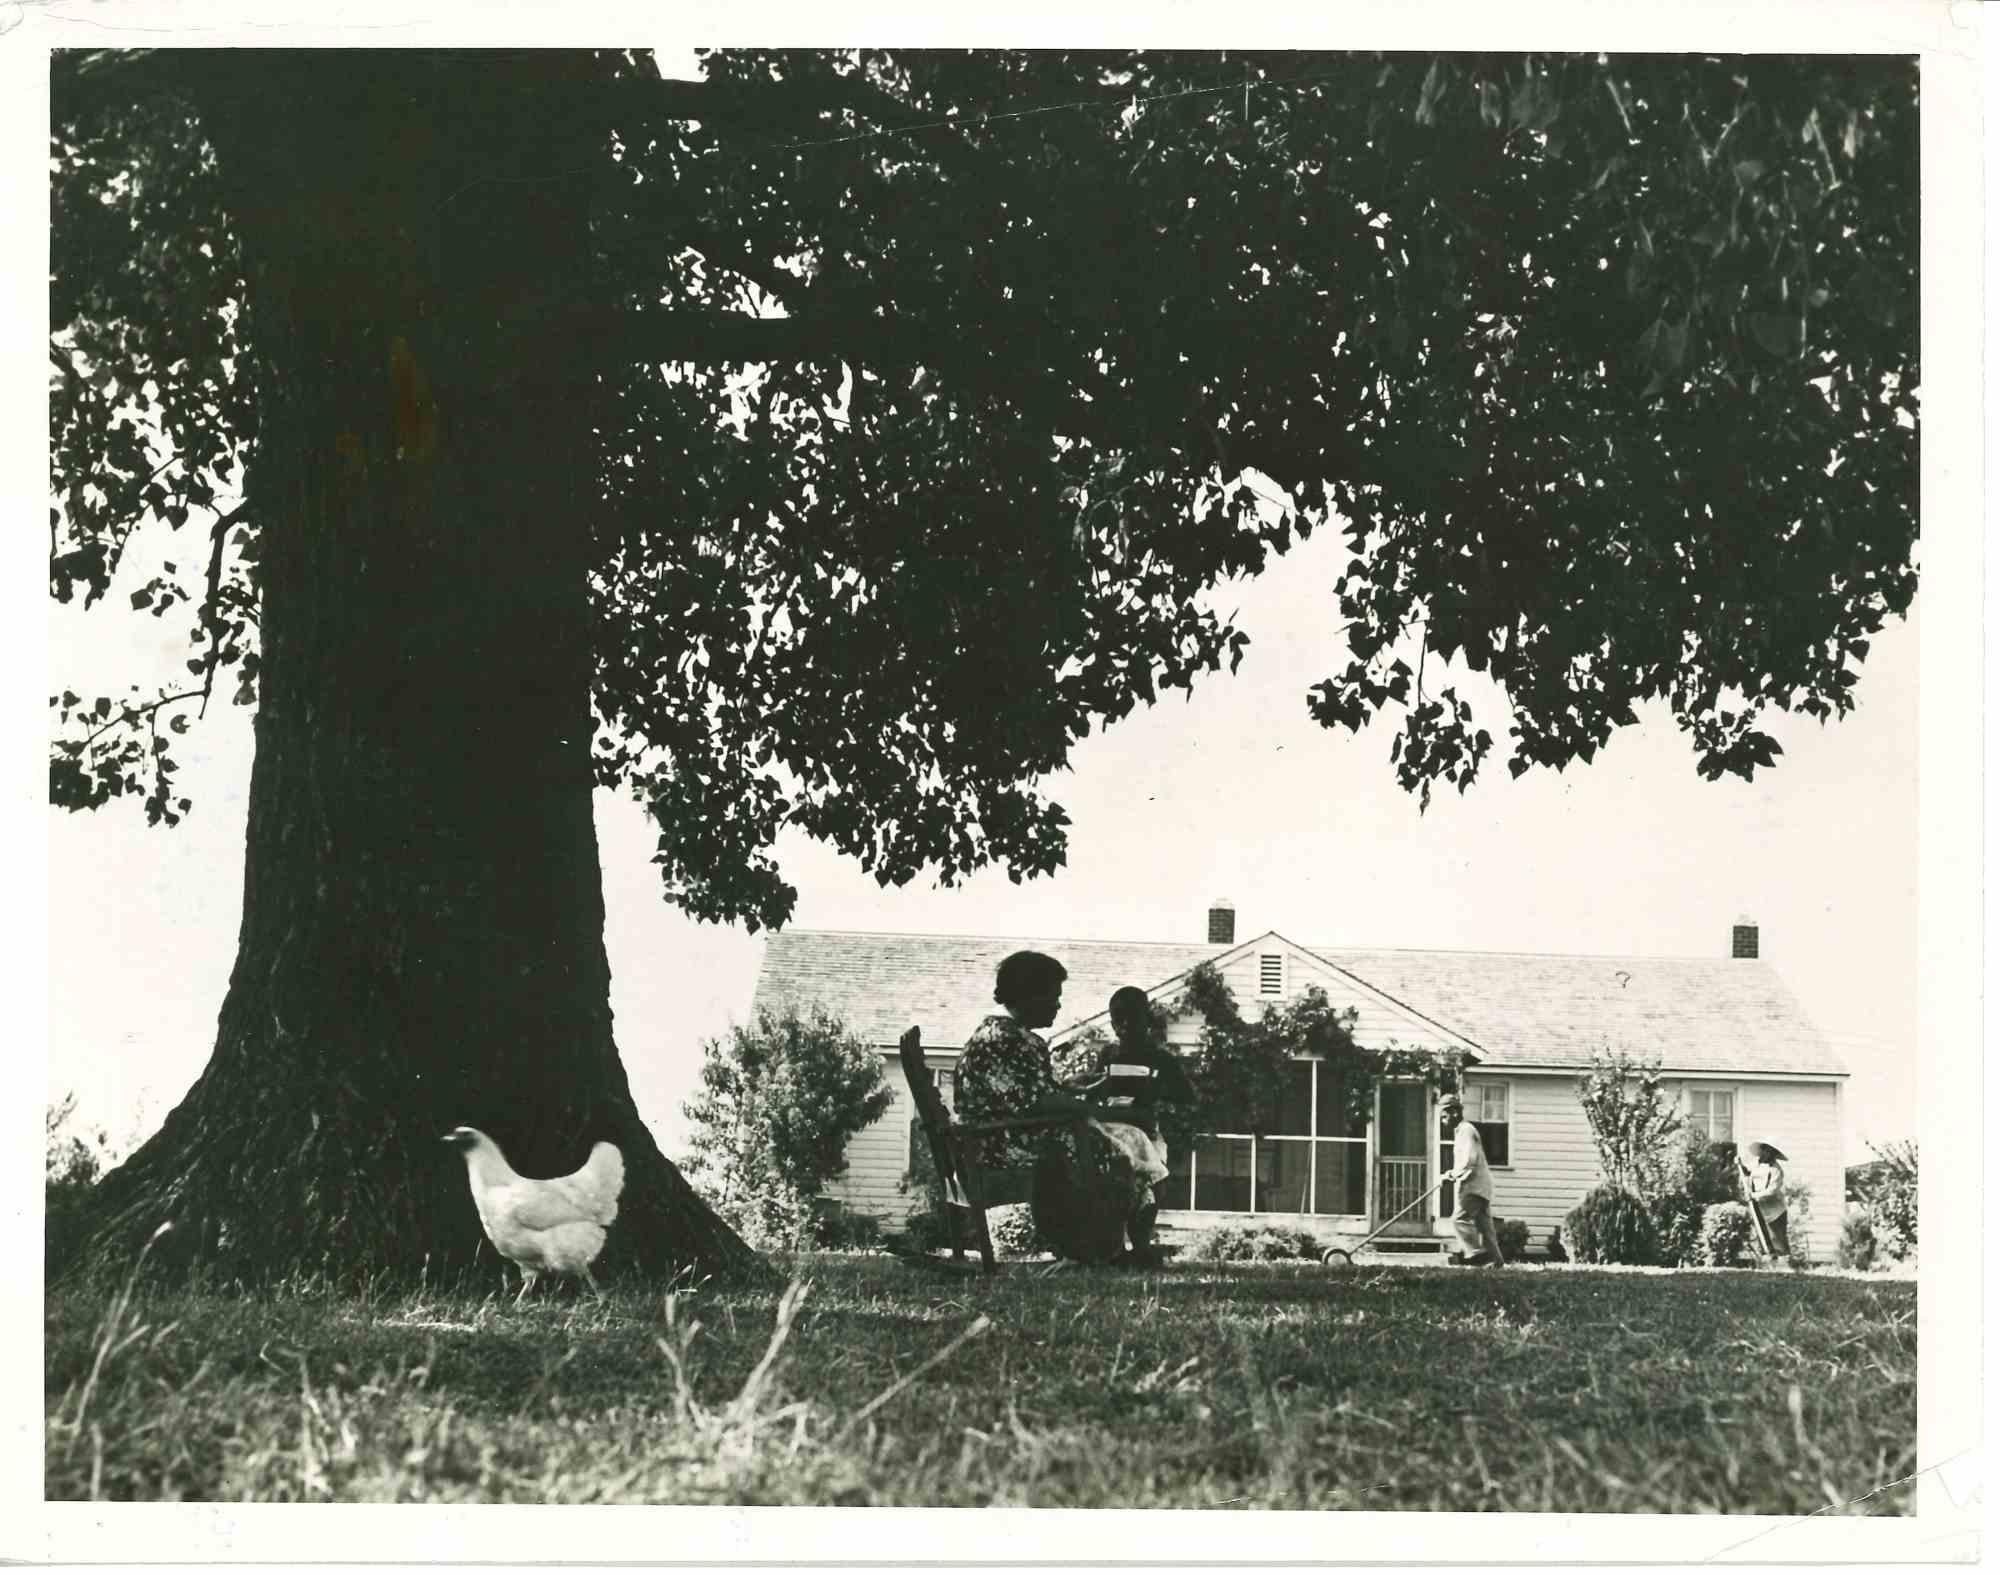 Unknown Figurative Photograph - The Farmer's Home - American Vintage Photograph - Mid 20th Century